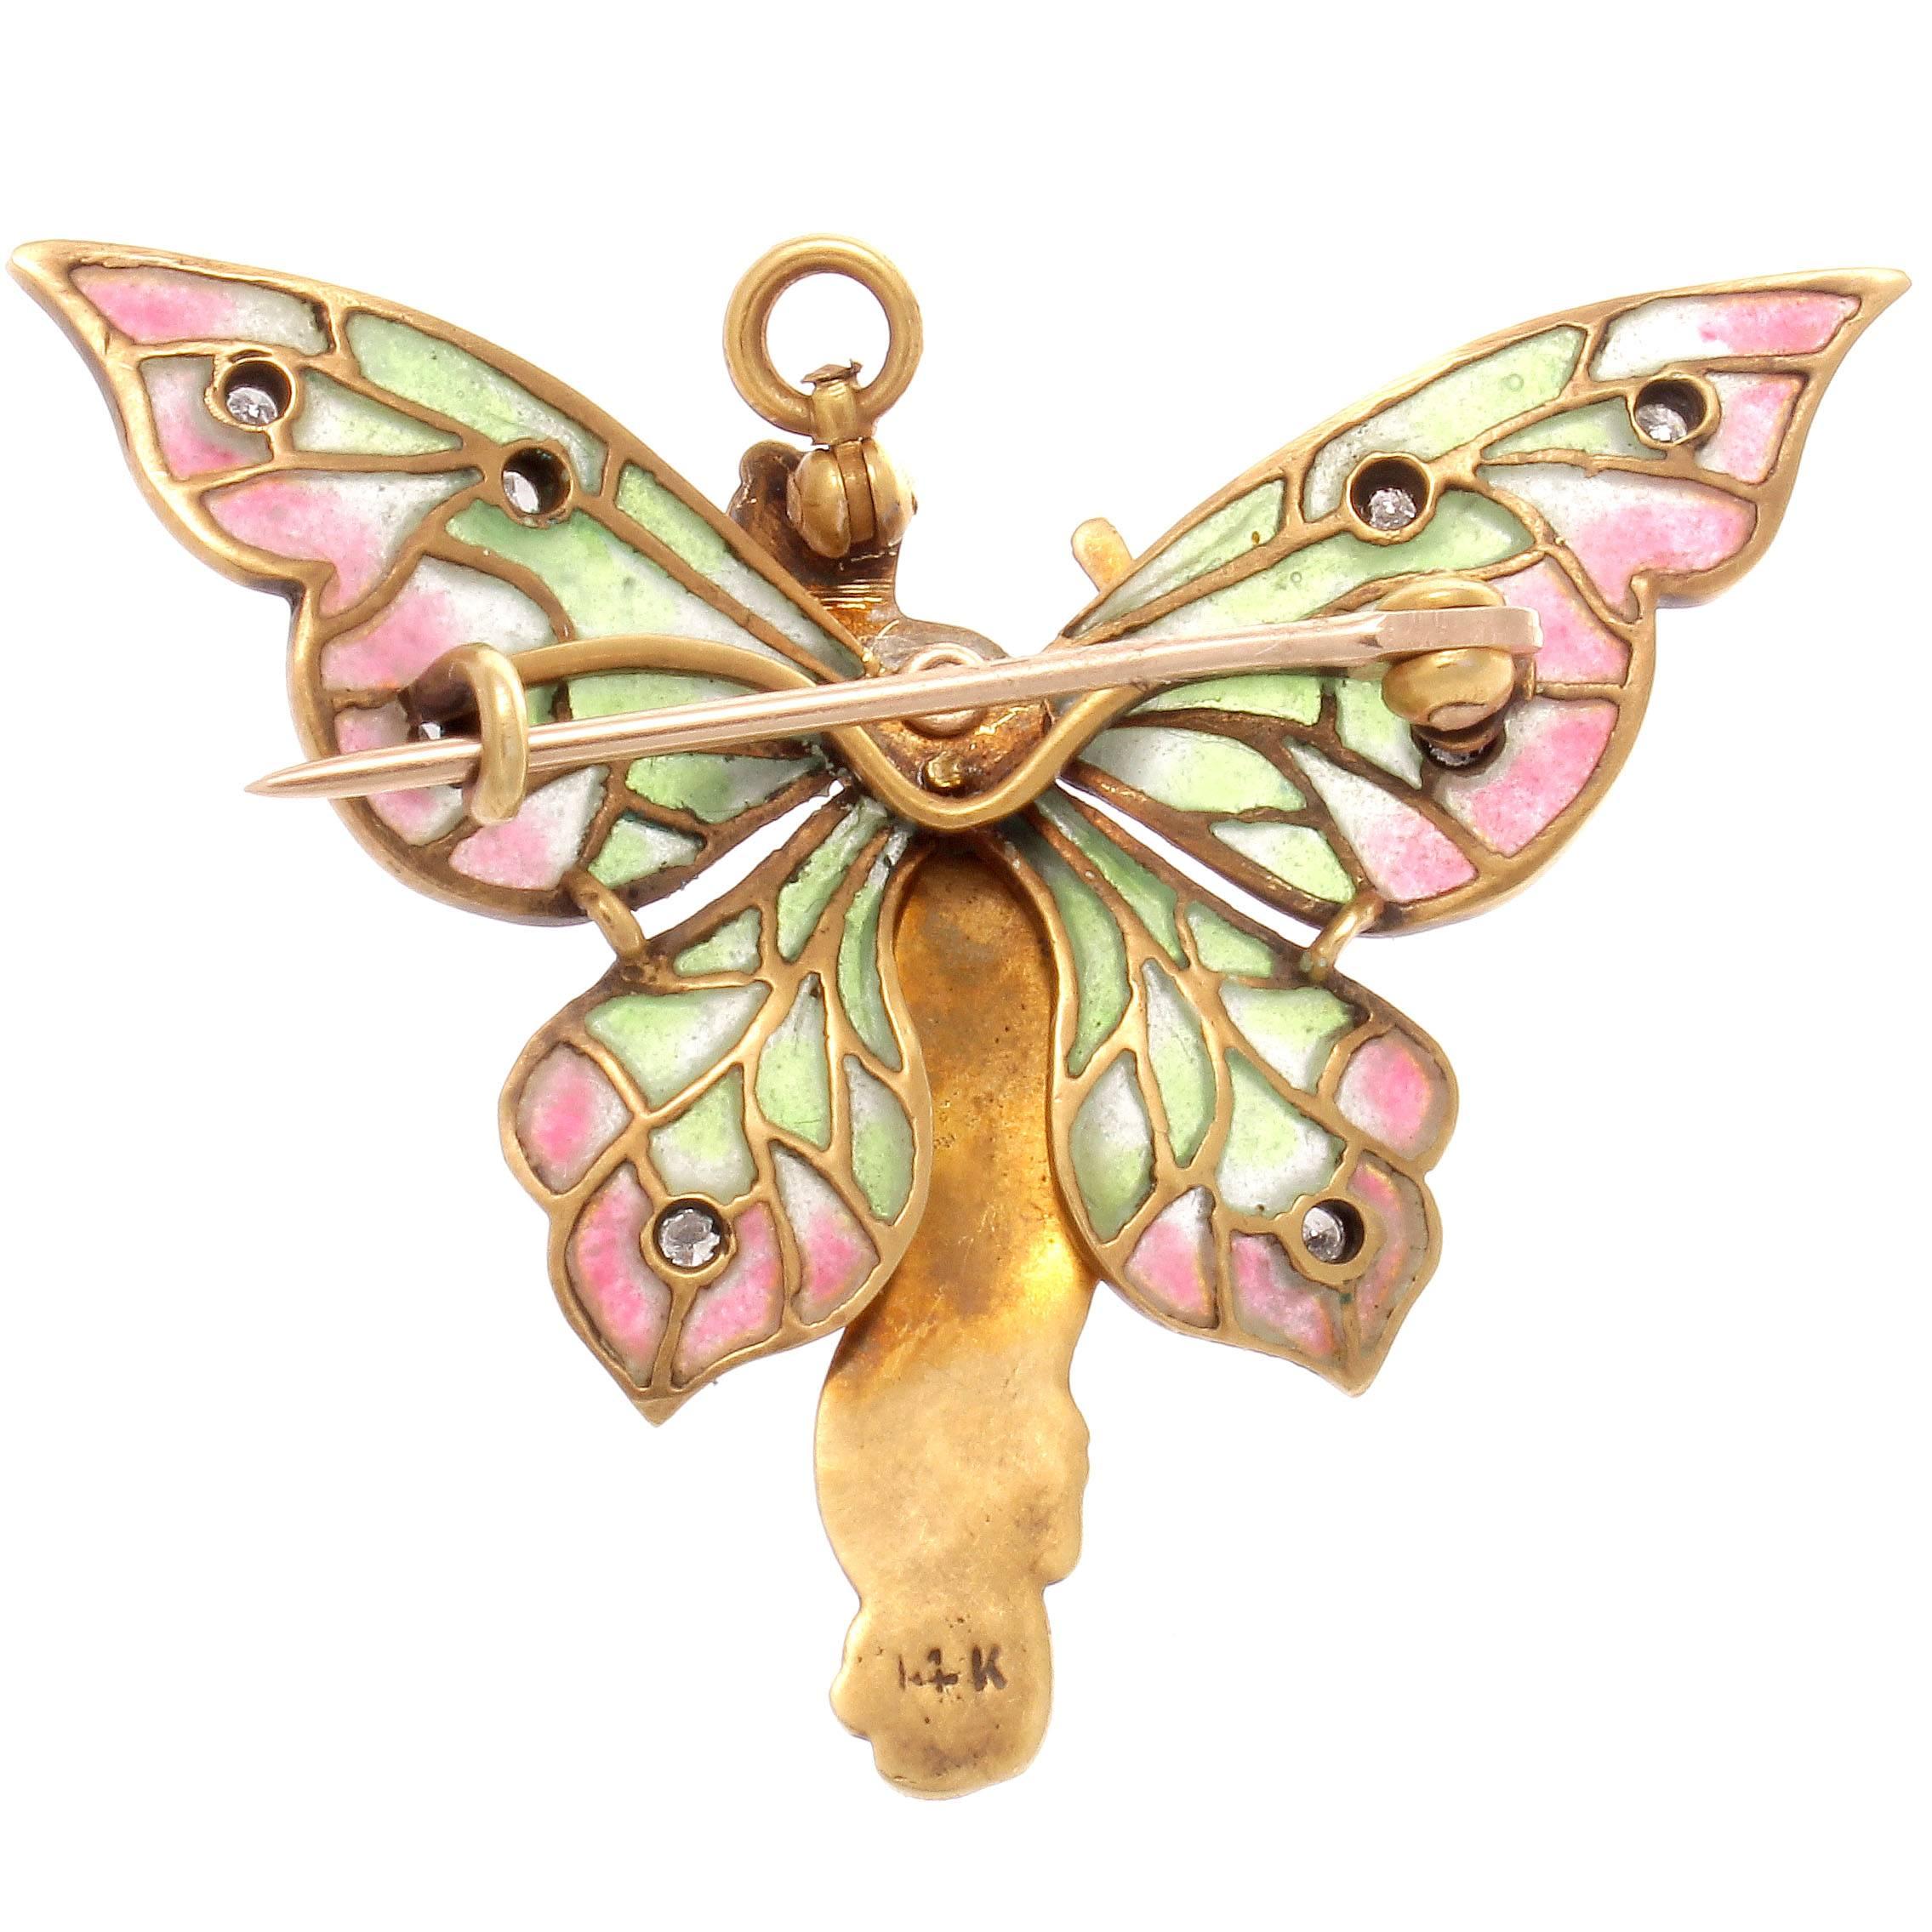 The beautiful young nymph is adorned with multi colored diamond wings. A small work of art that will bring joy to the observer. Crafted in 14k gold.